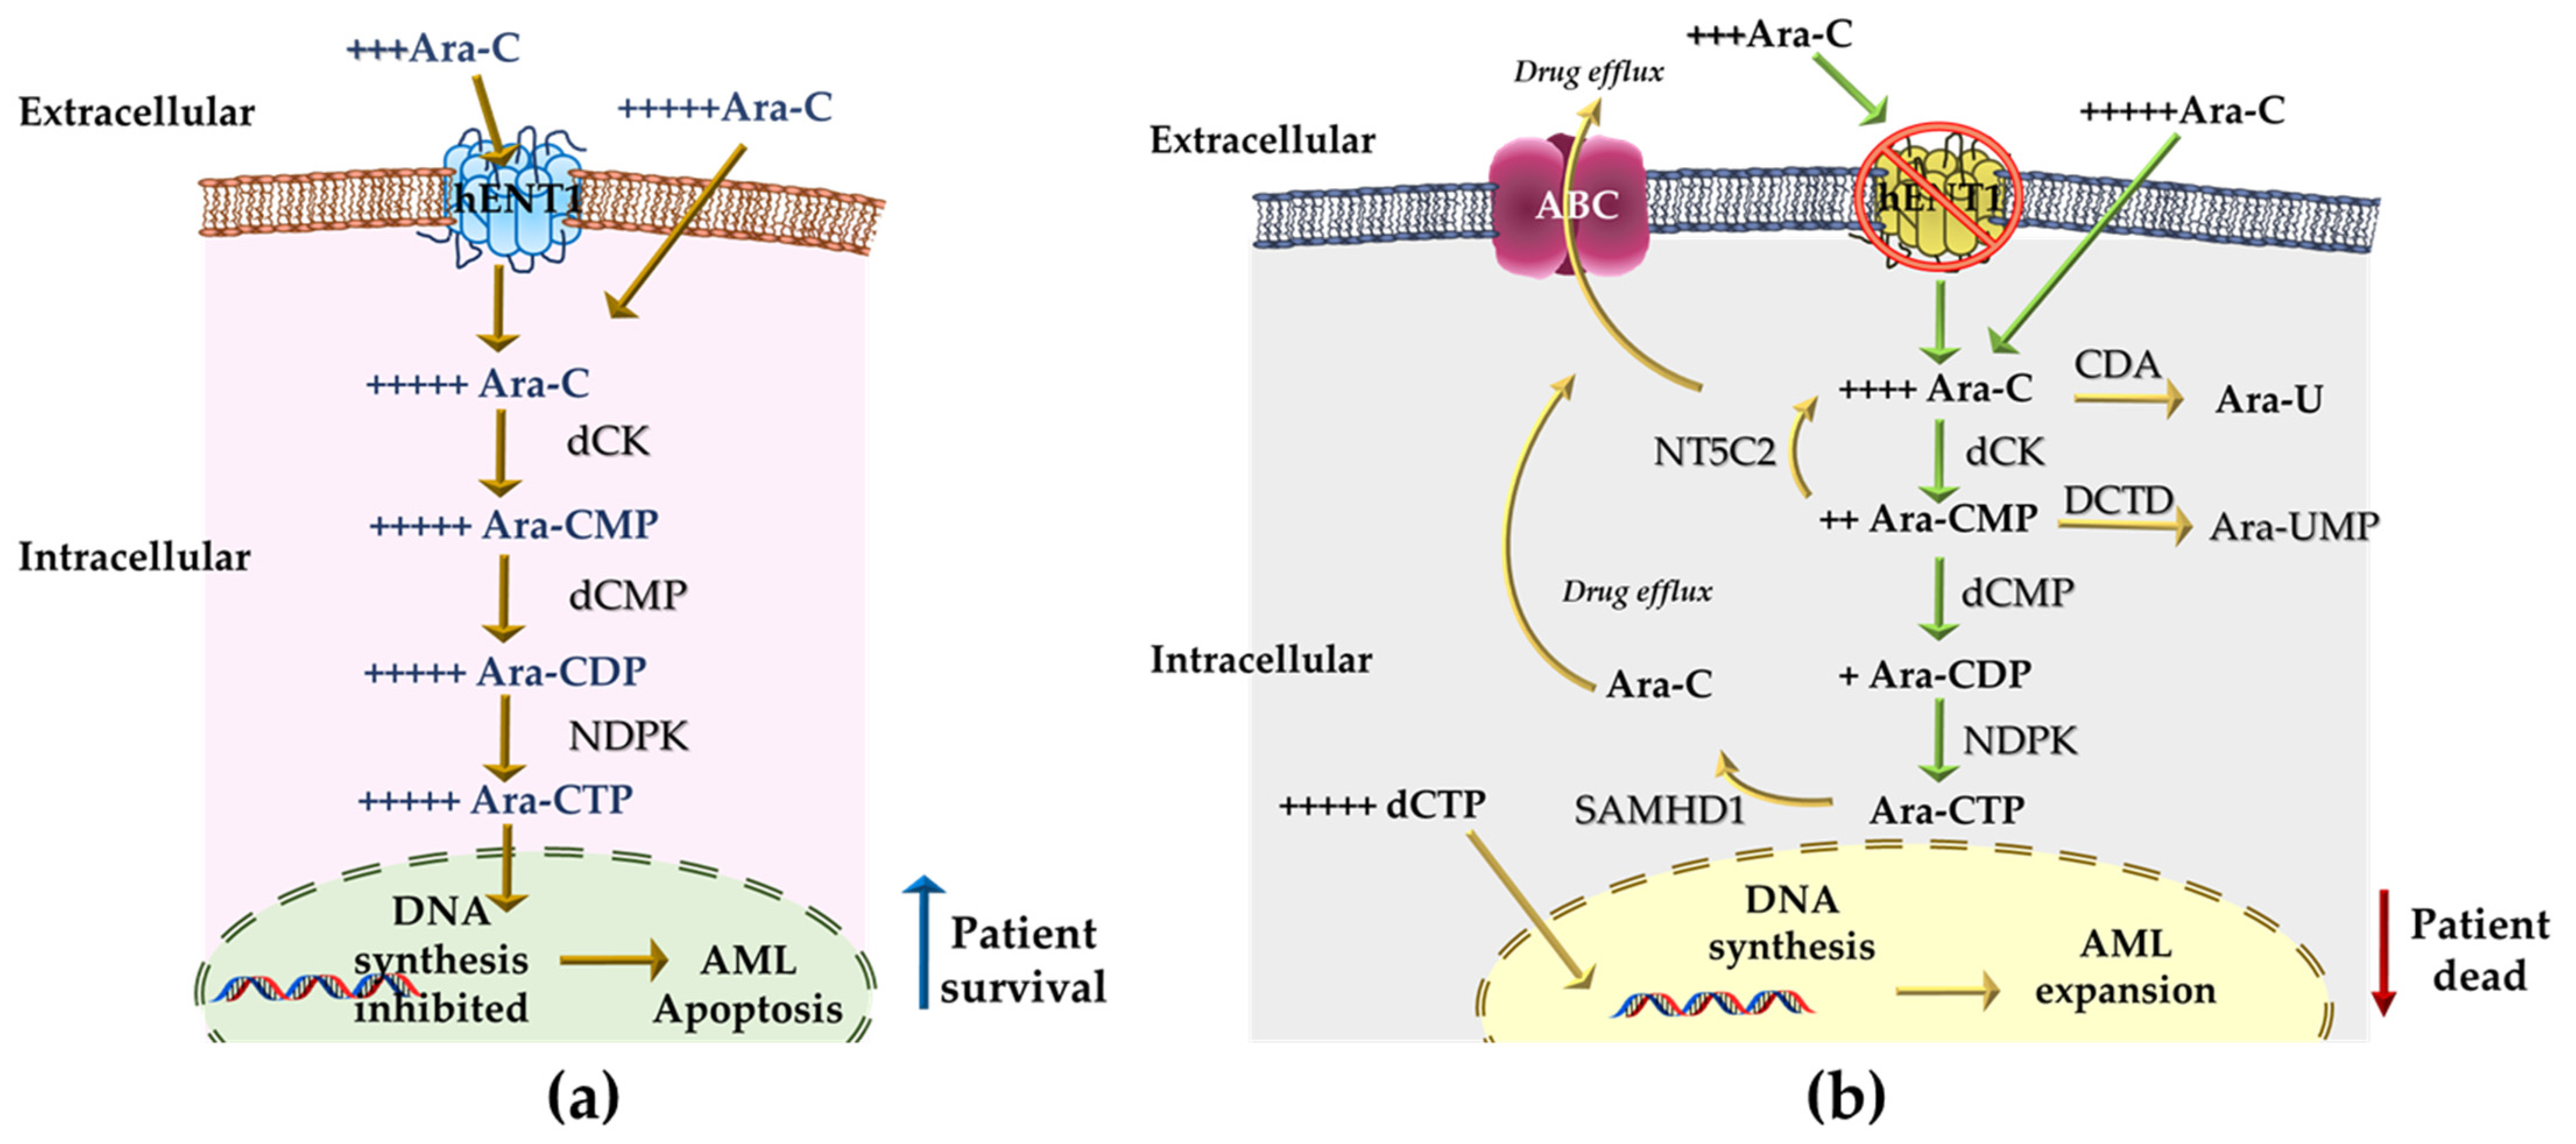 IJMS | Free Full-Text | Inhibitors of Chemoresistance Pathways in  Combination with Ara-C to Overcome Multidrug Resistance in AML. A Mini  Review